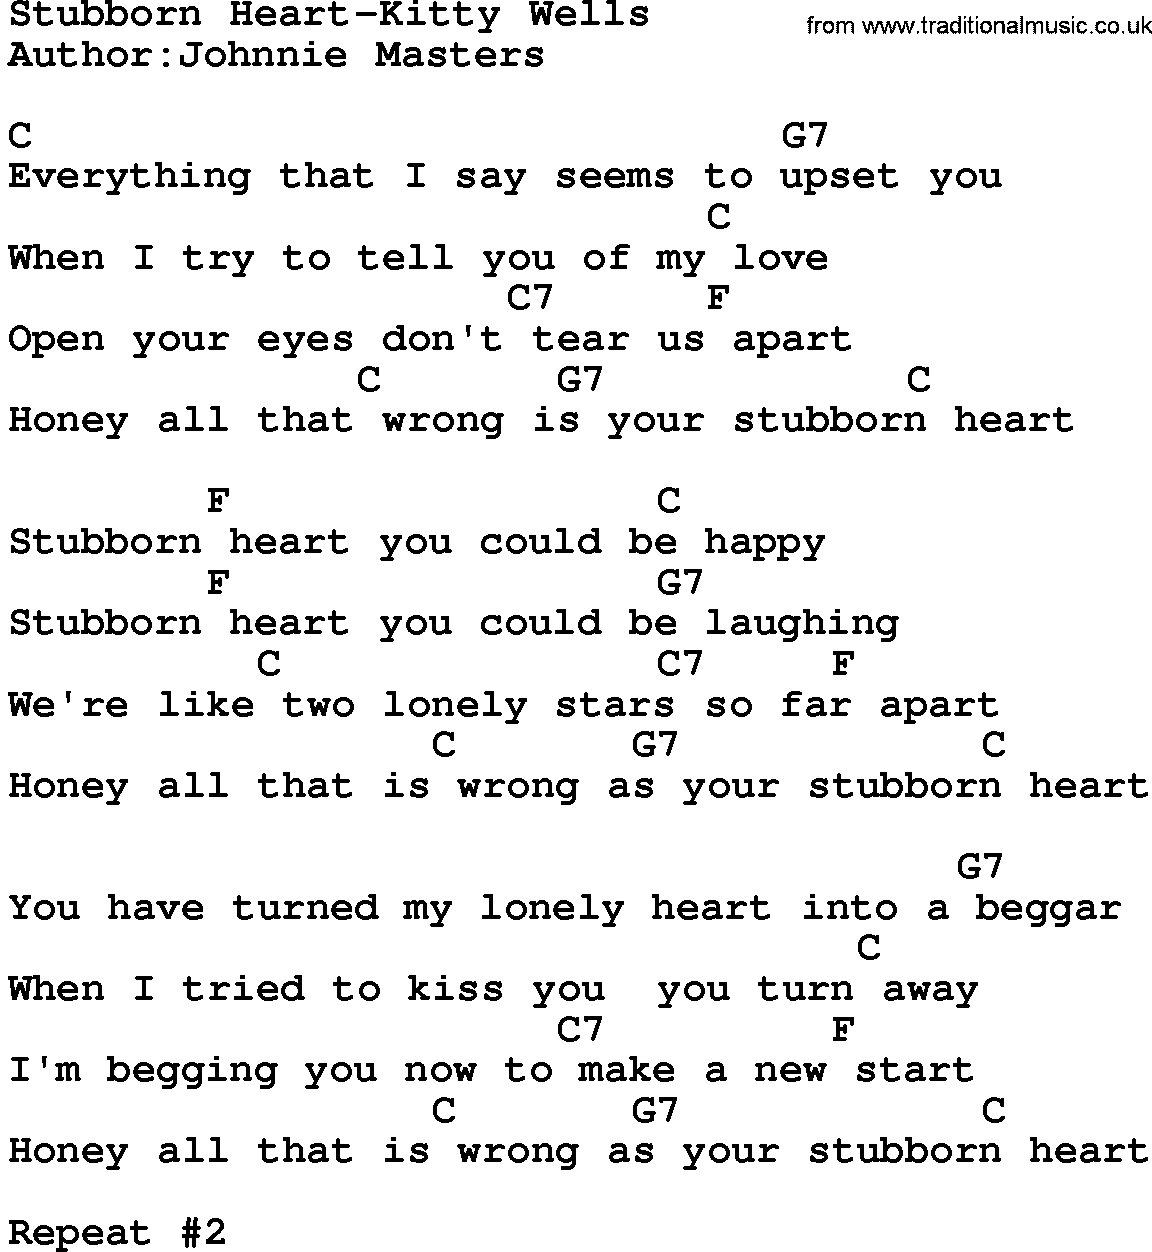 Country music song: Stubborn Heart-Kitty Wells lyrics and chords